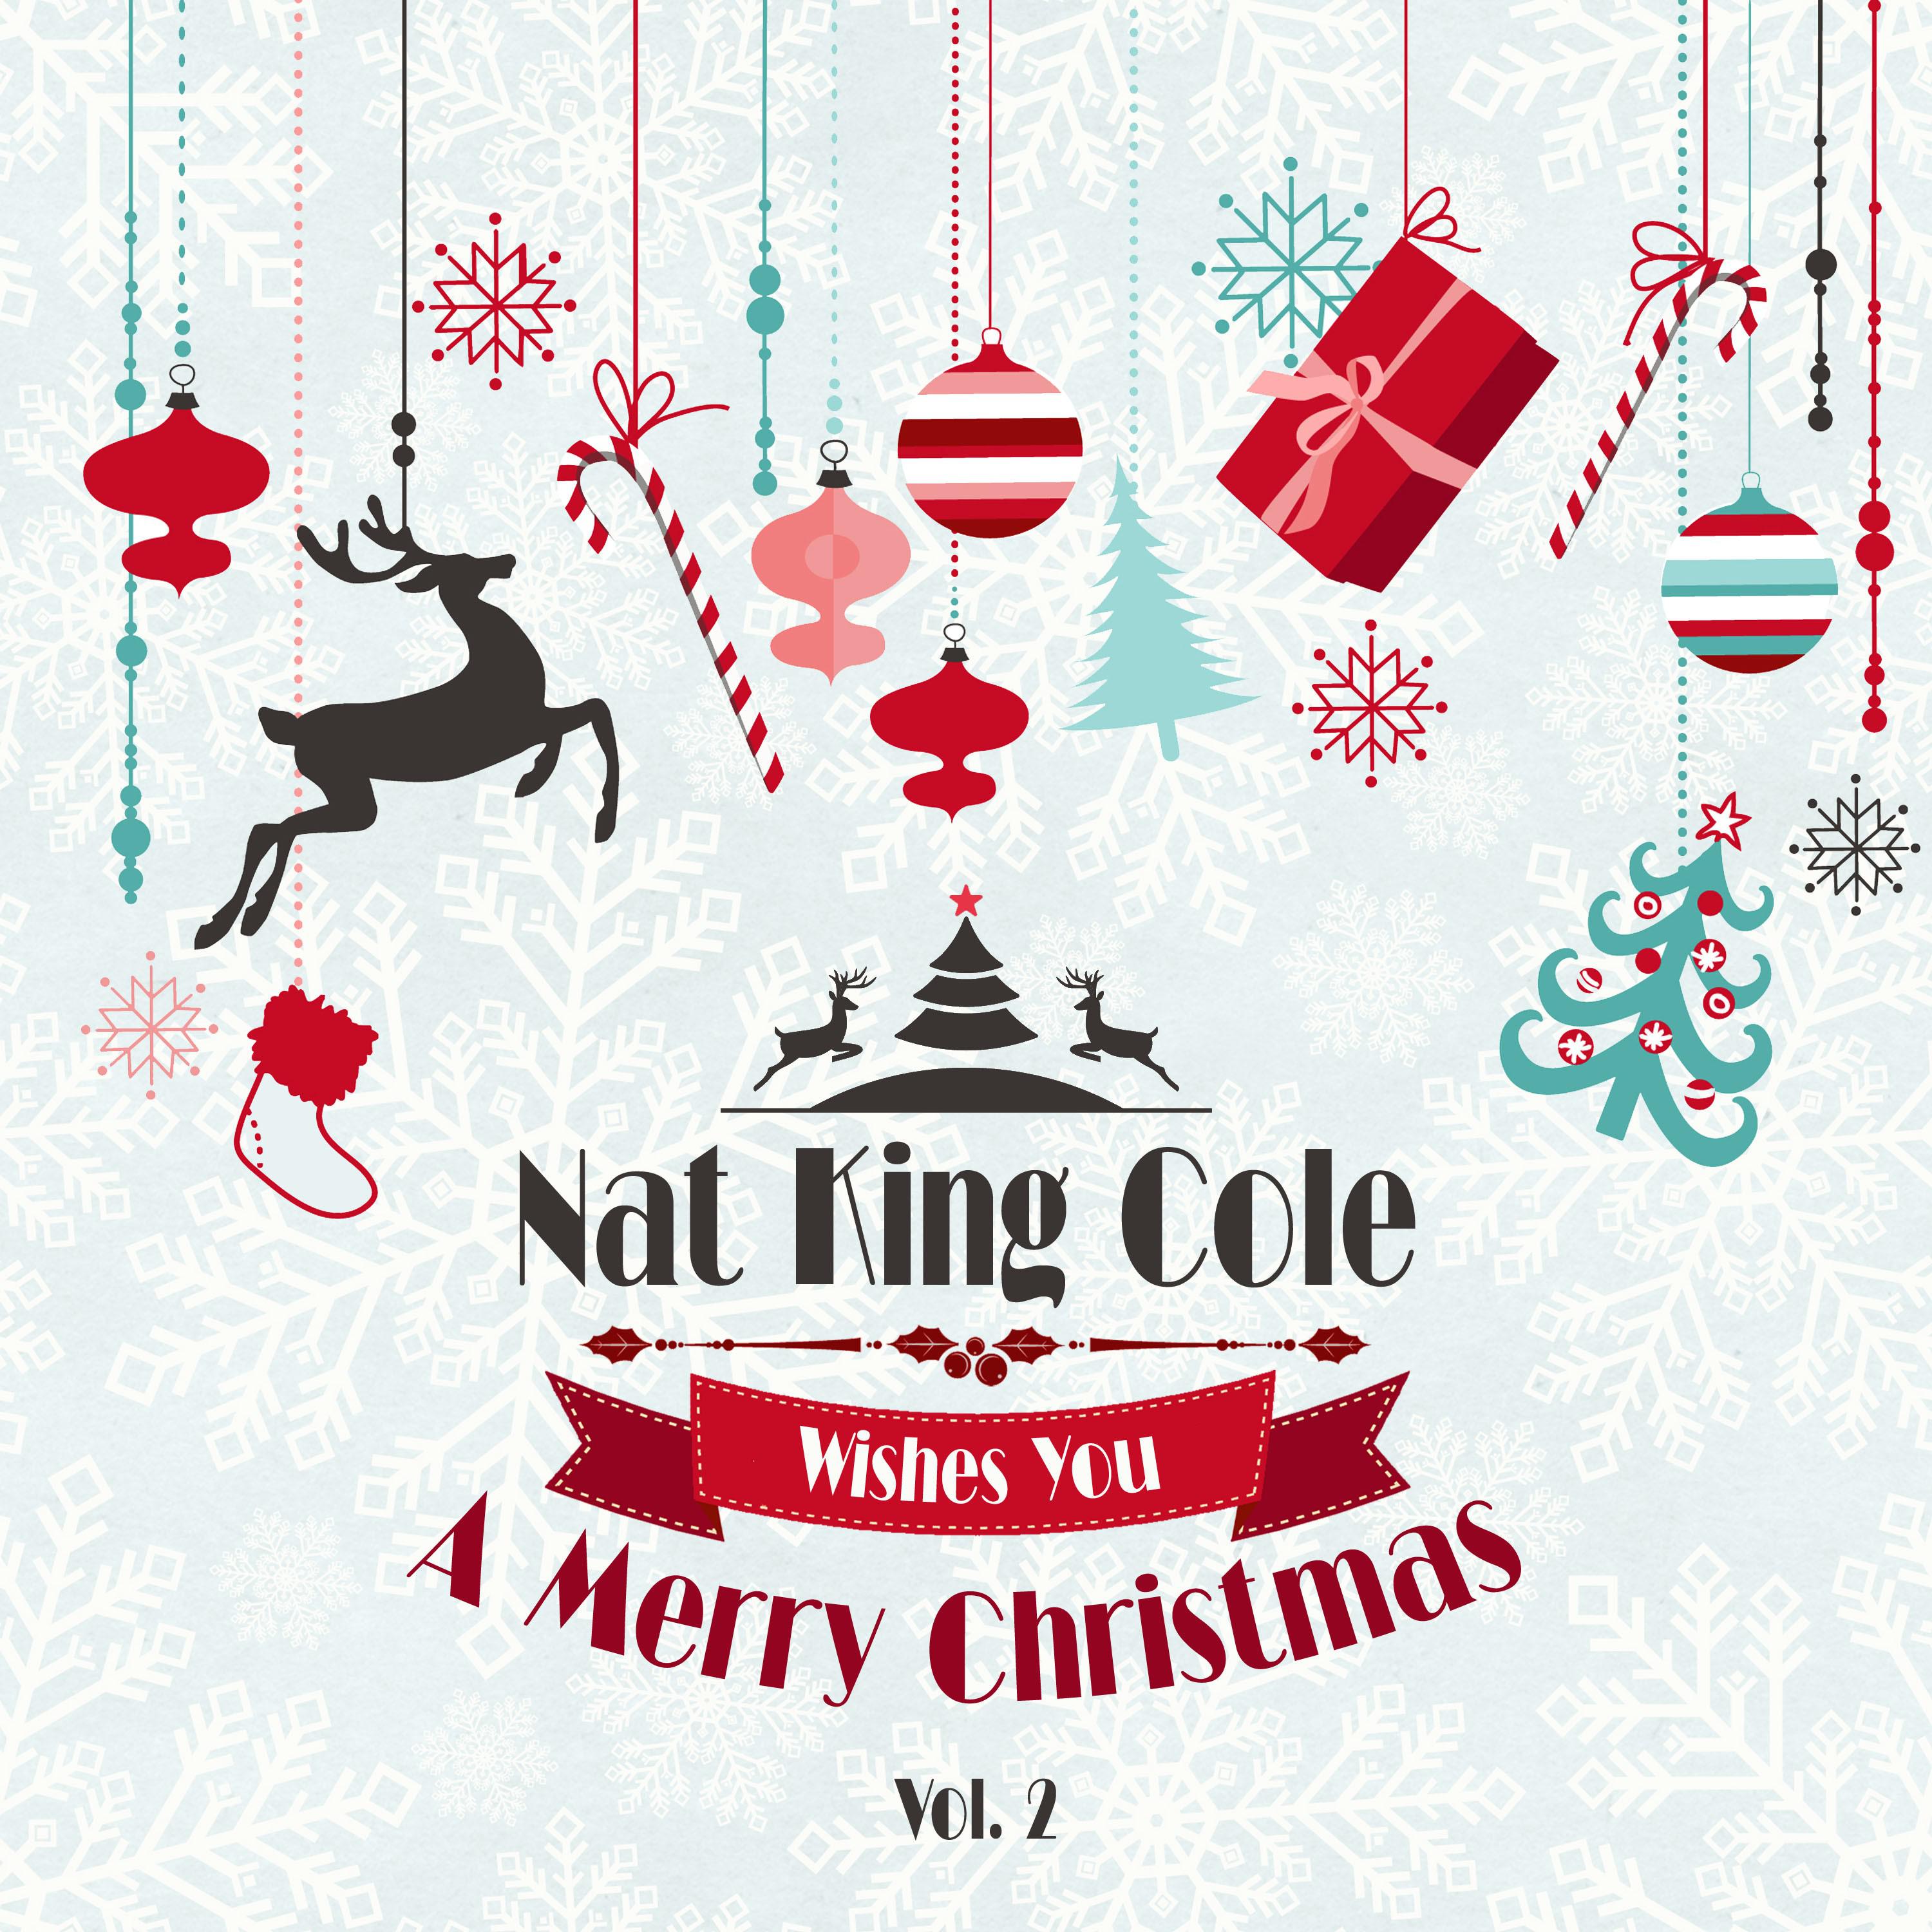 Nat King Cole Wishes You a Merry Christmas, Vol. 2